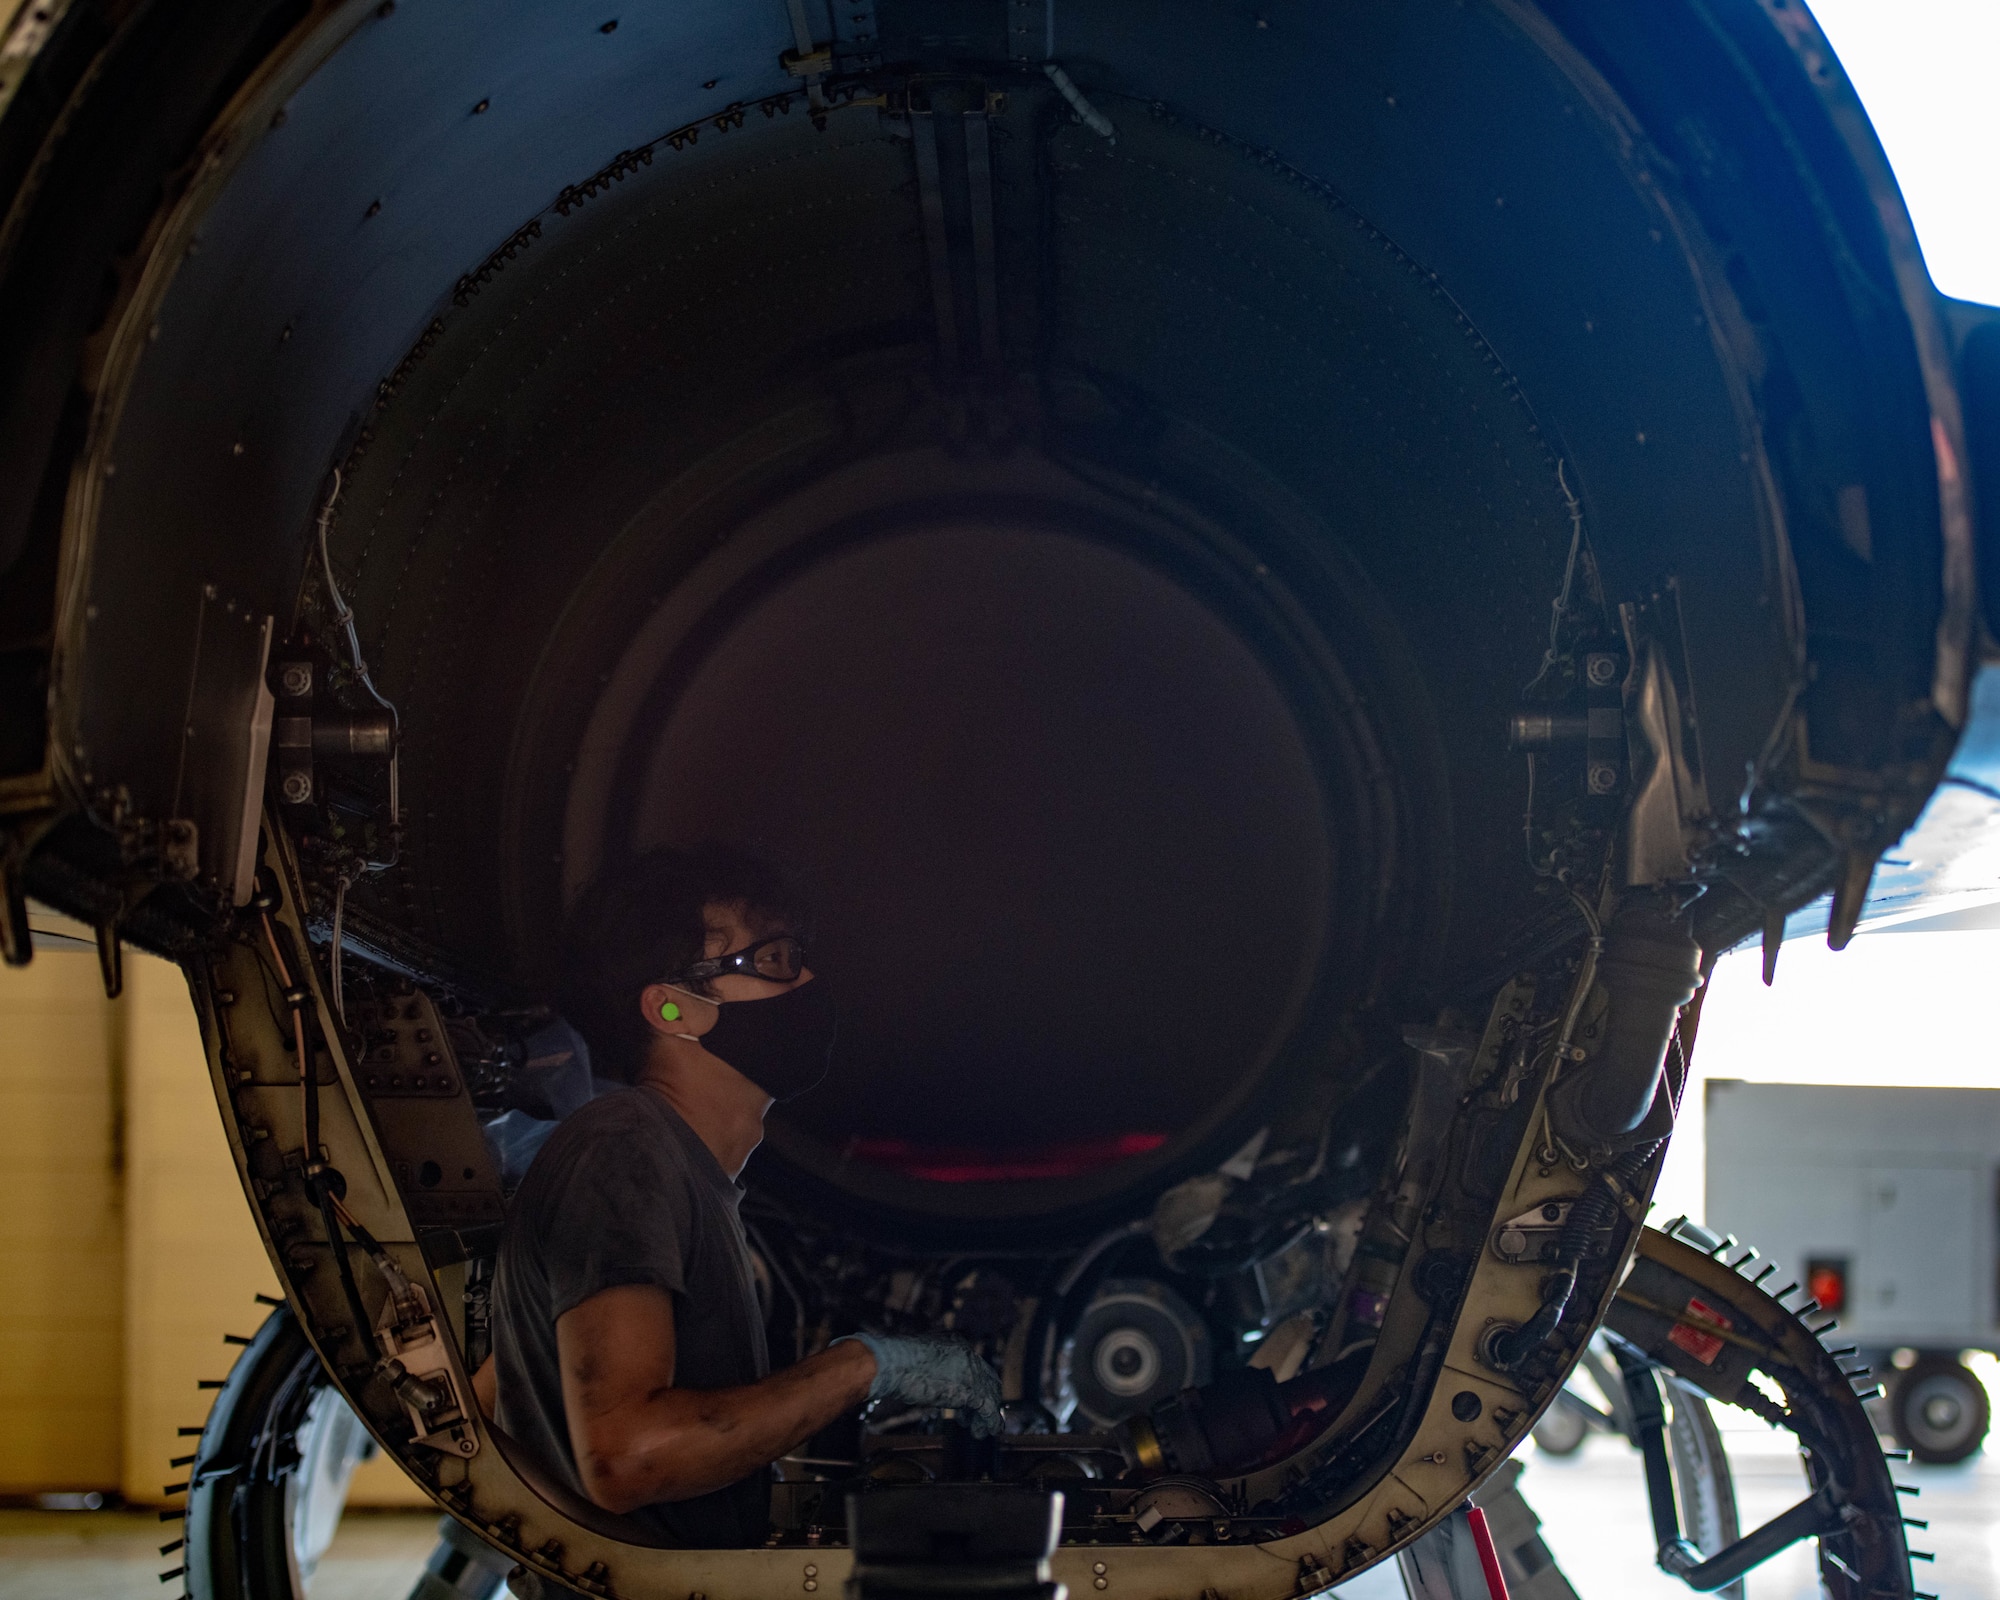 Republic of Singapore Air Force Military Expert One Staff Sgt. Concenciao Axel, 425th Fighter Squadron maintainer, inspects the inside of an F-16C Fighting Falcon Aug. 5, 2020, at Luke Air Force Base, Ariz.